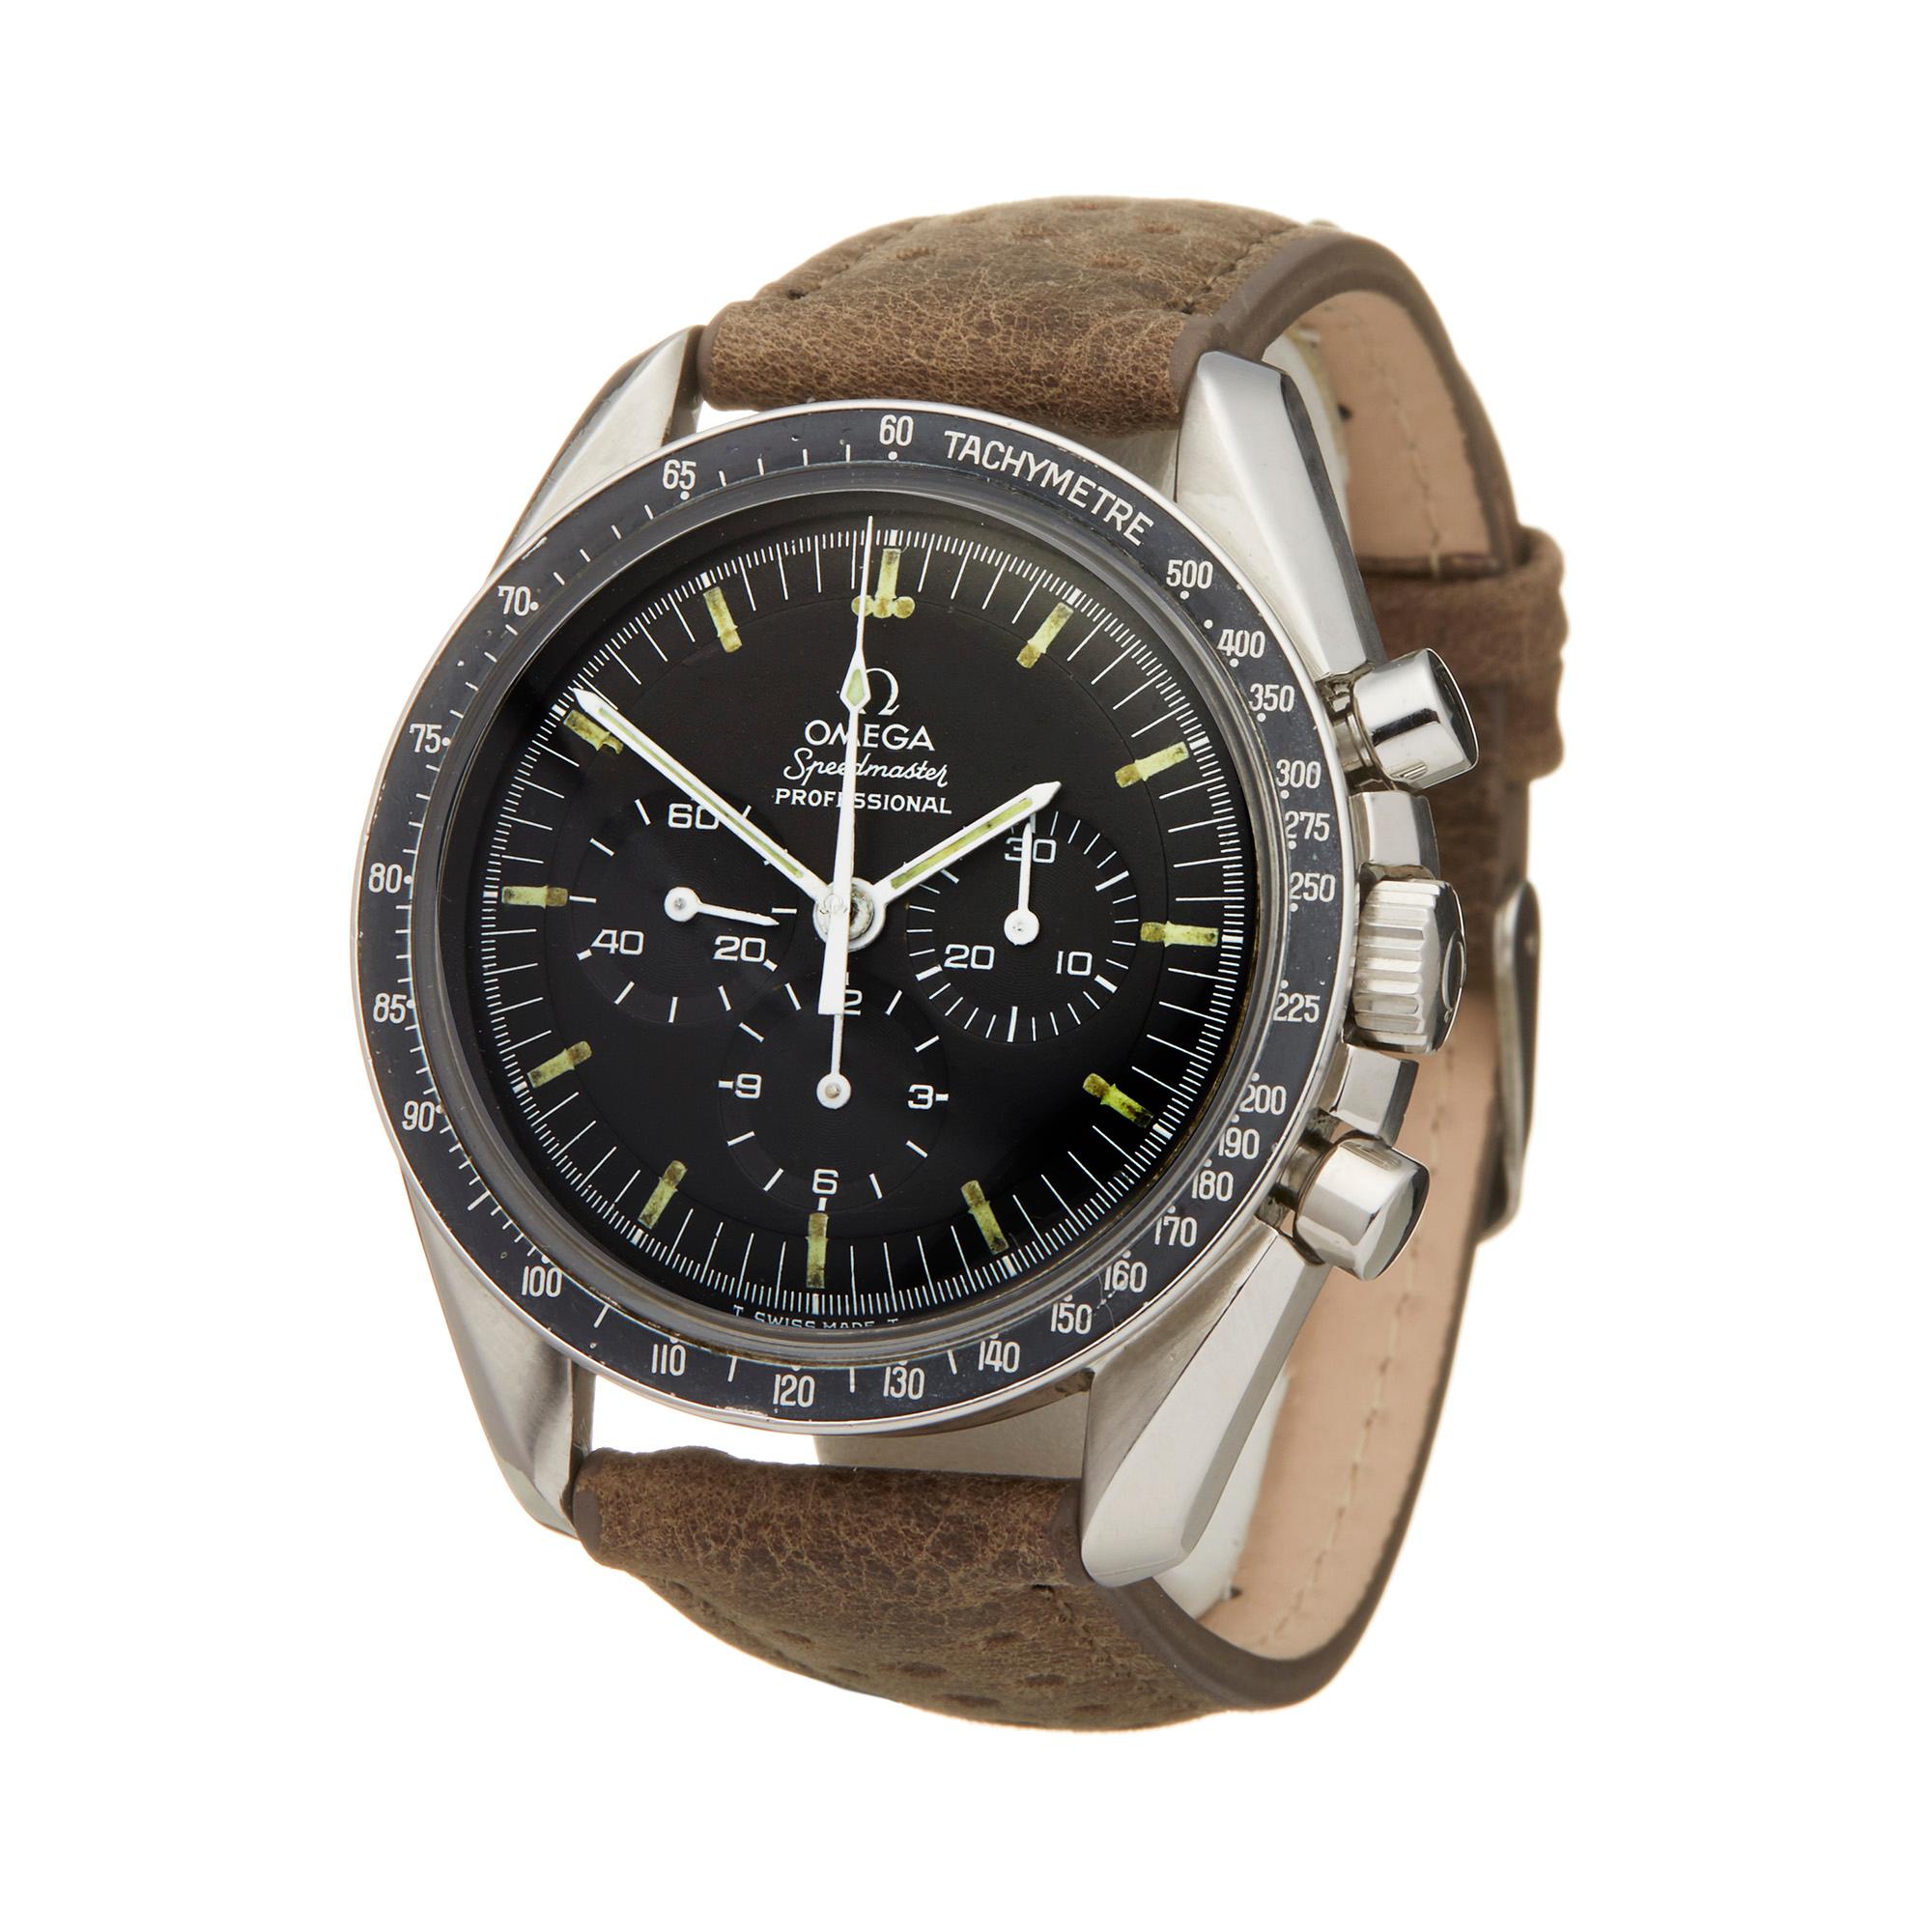 Ref: W5913
Manufacturer: Omega
Model: Speedmaster
Model Ref: 145.022-69 ST
Age: Circa 1960's
Gender: Mens
Complete With: Presentation Box 
Dial: Black Baton
Glass: Sapphire Crystal
Movement: Mechanical Wind
Water Resistance: To Manufacturers